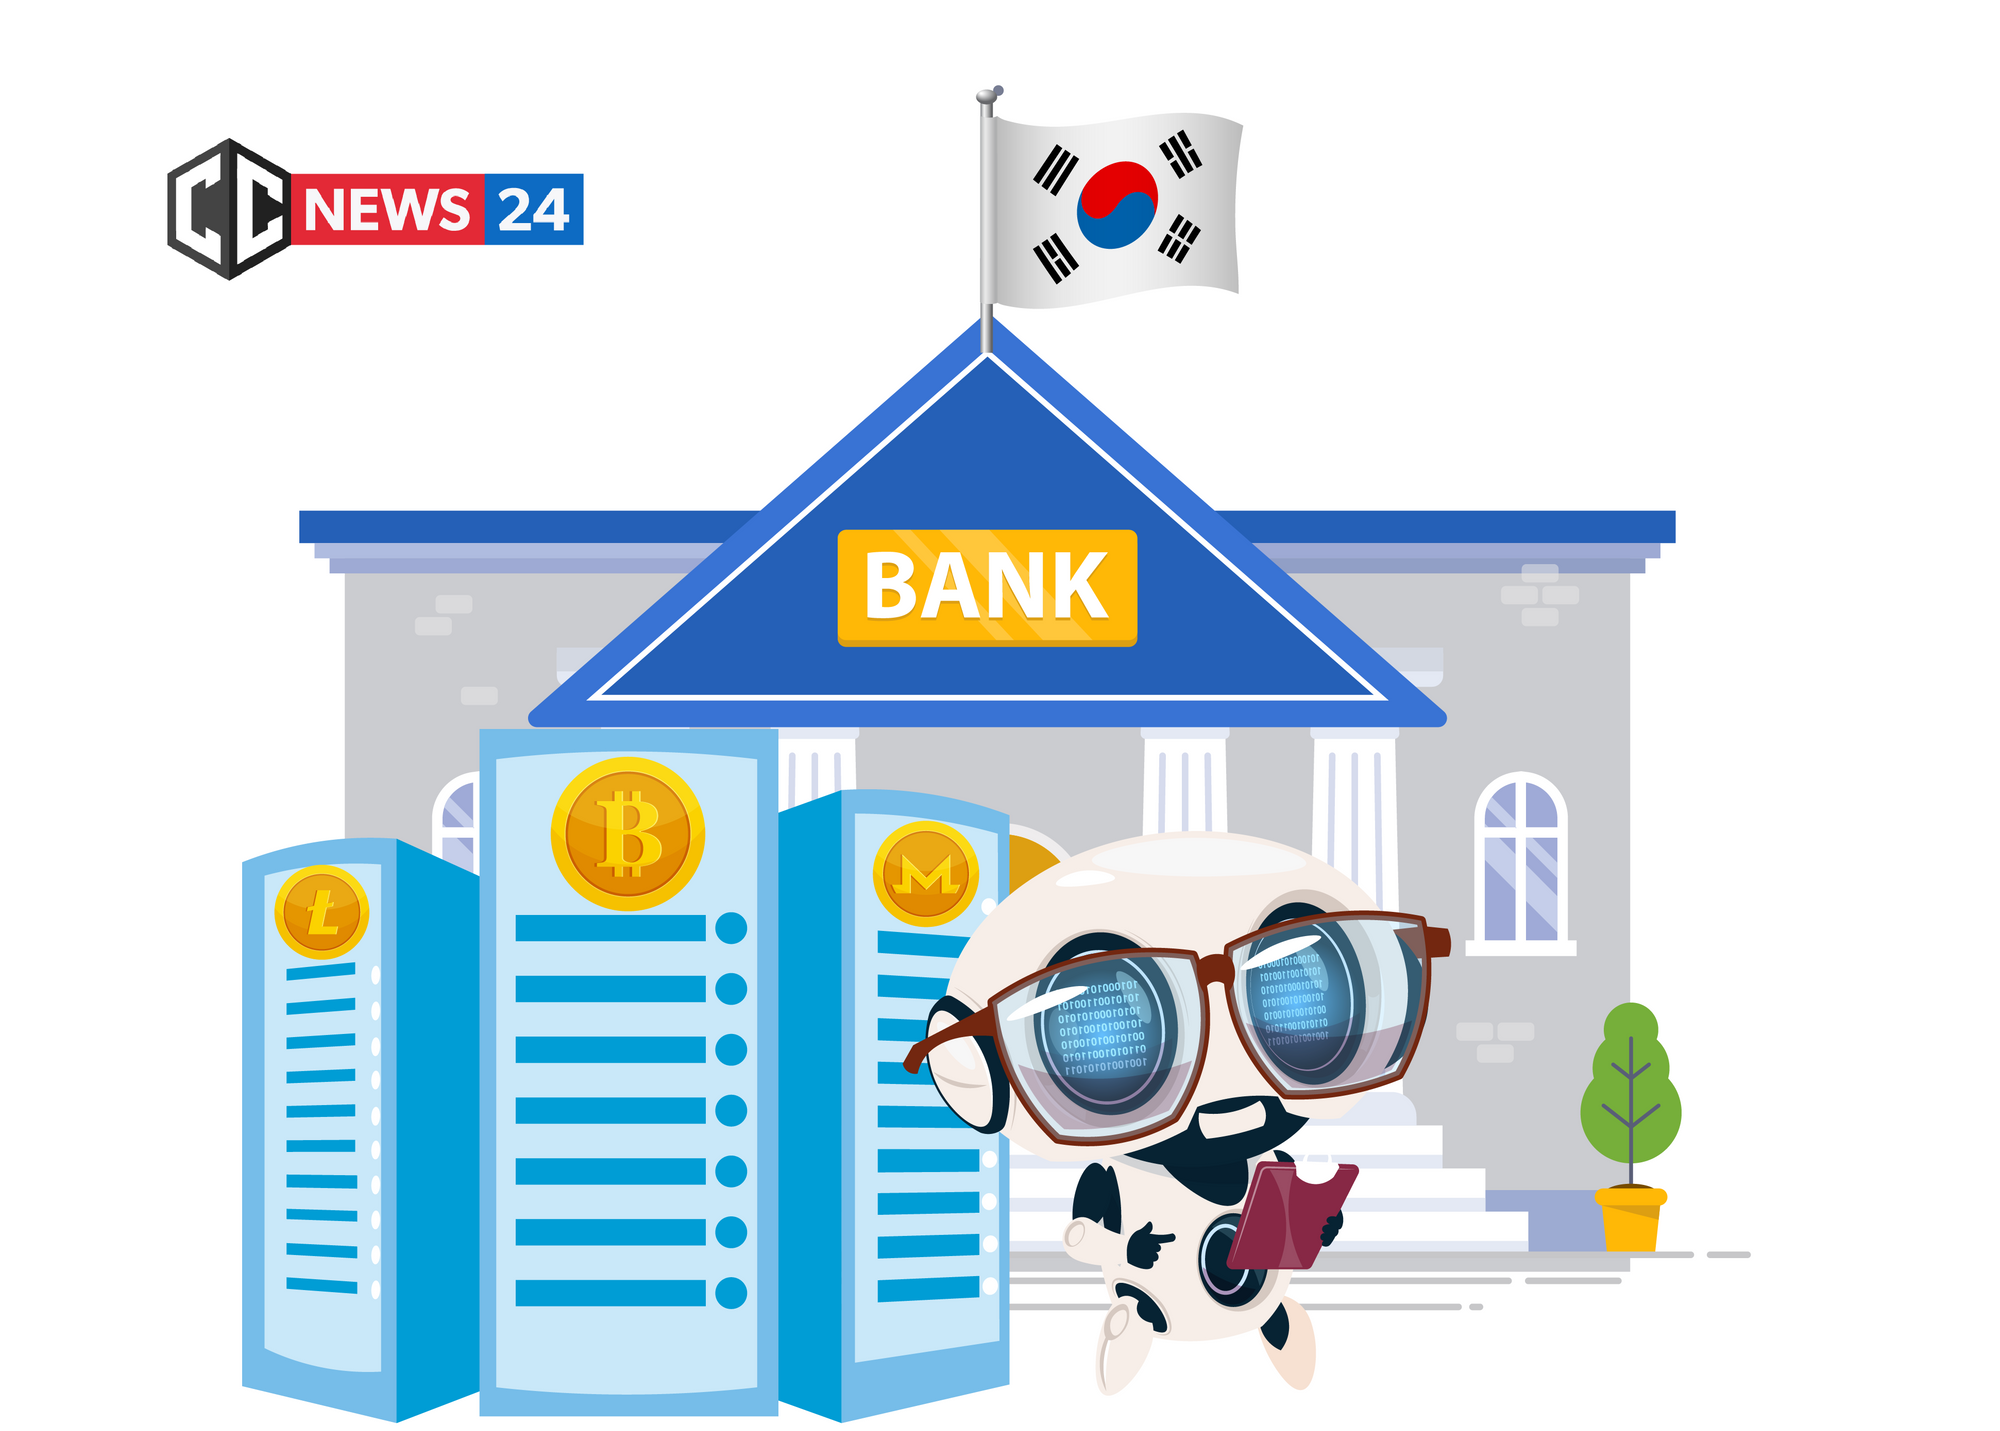 KB's largest Korean bank will launch service to store Cryptocurrency